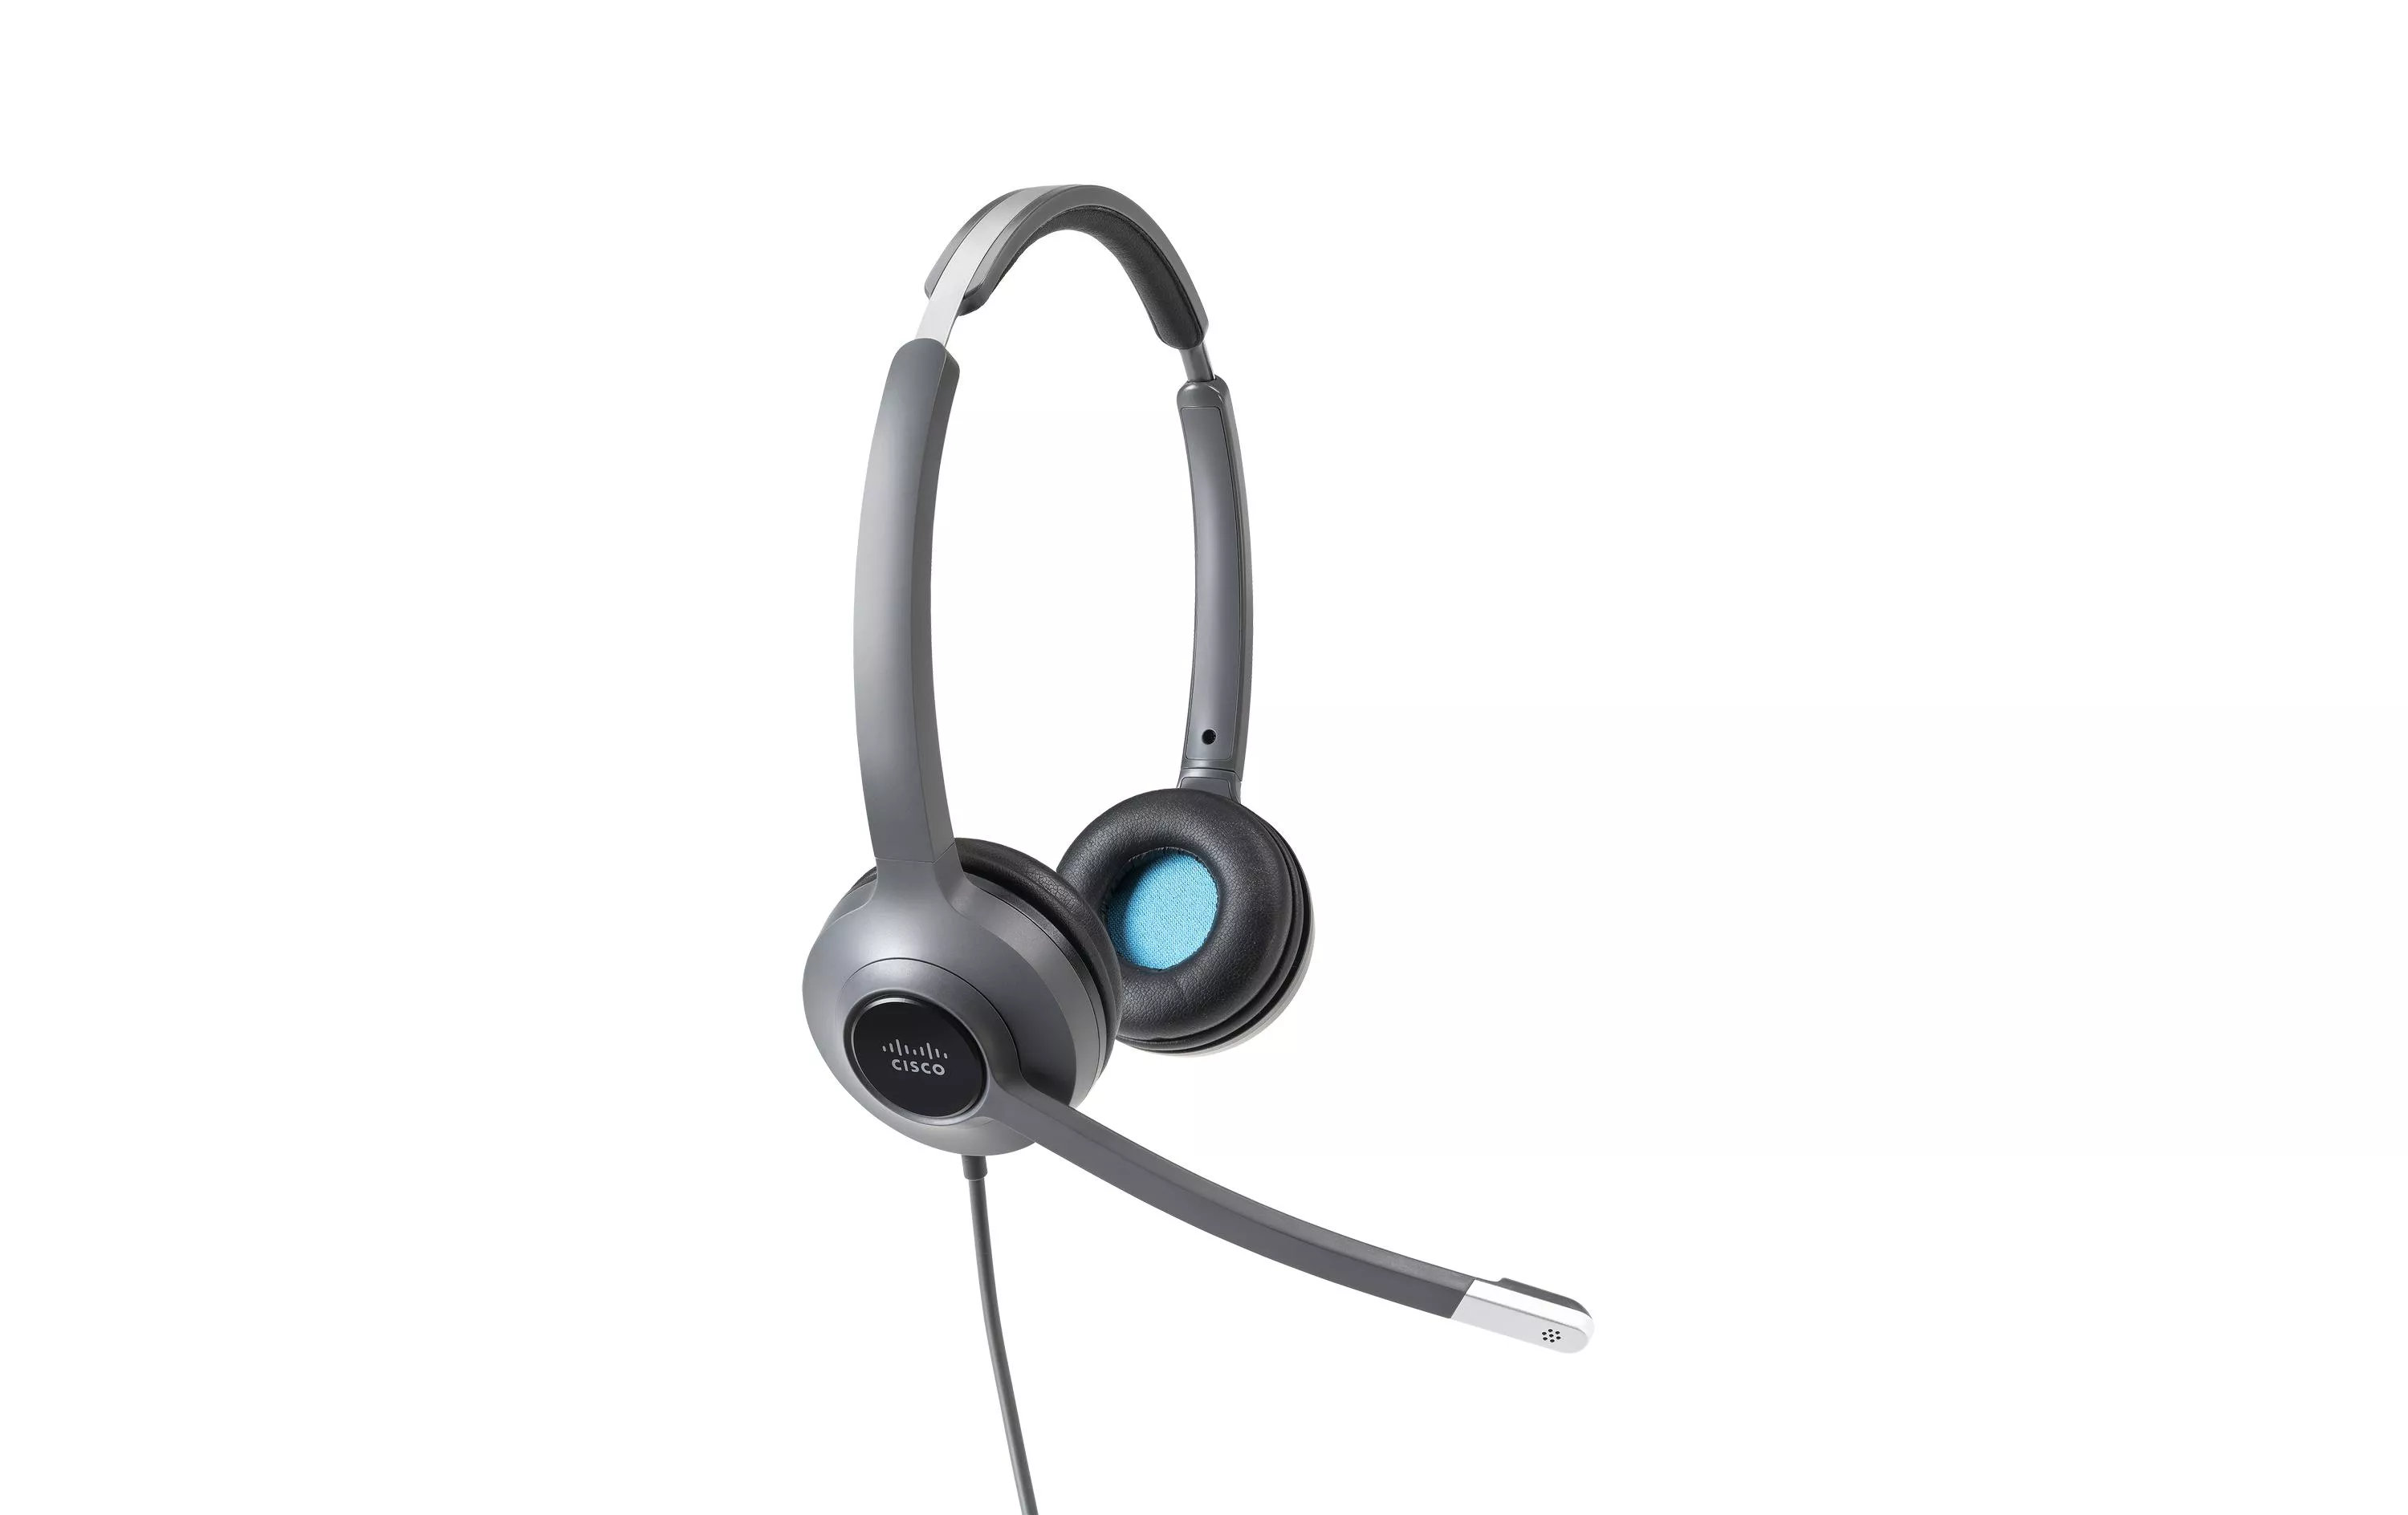 Headset 522 Duo 3.5mm & USB-A Adapter